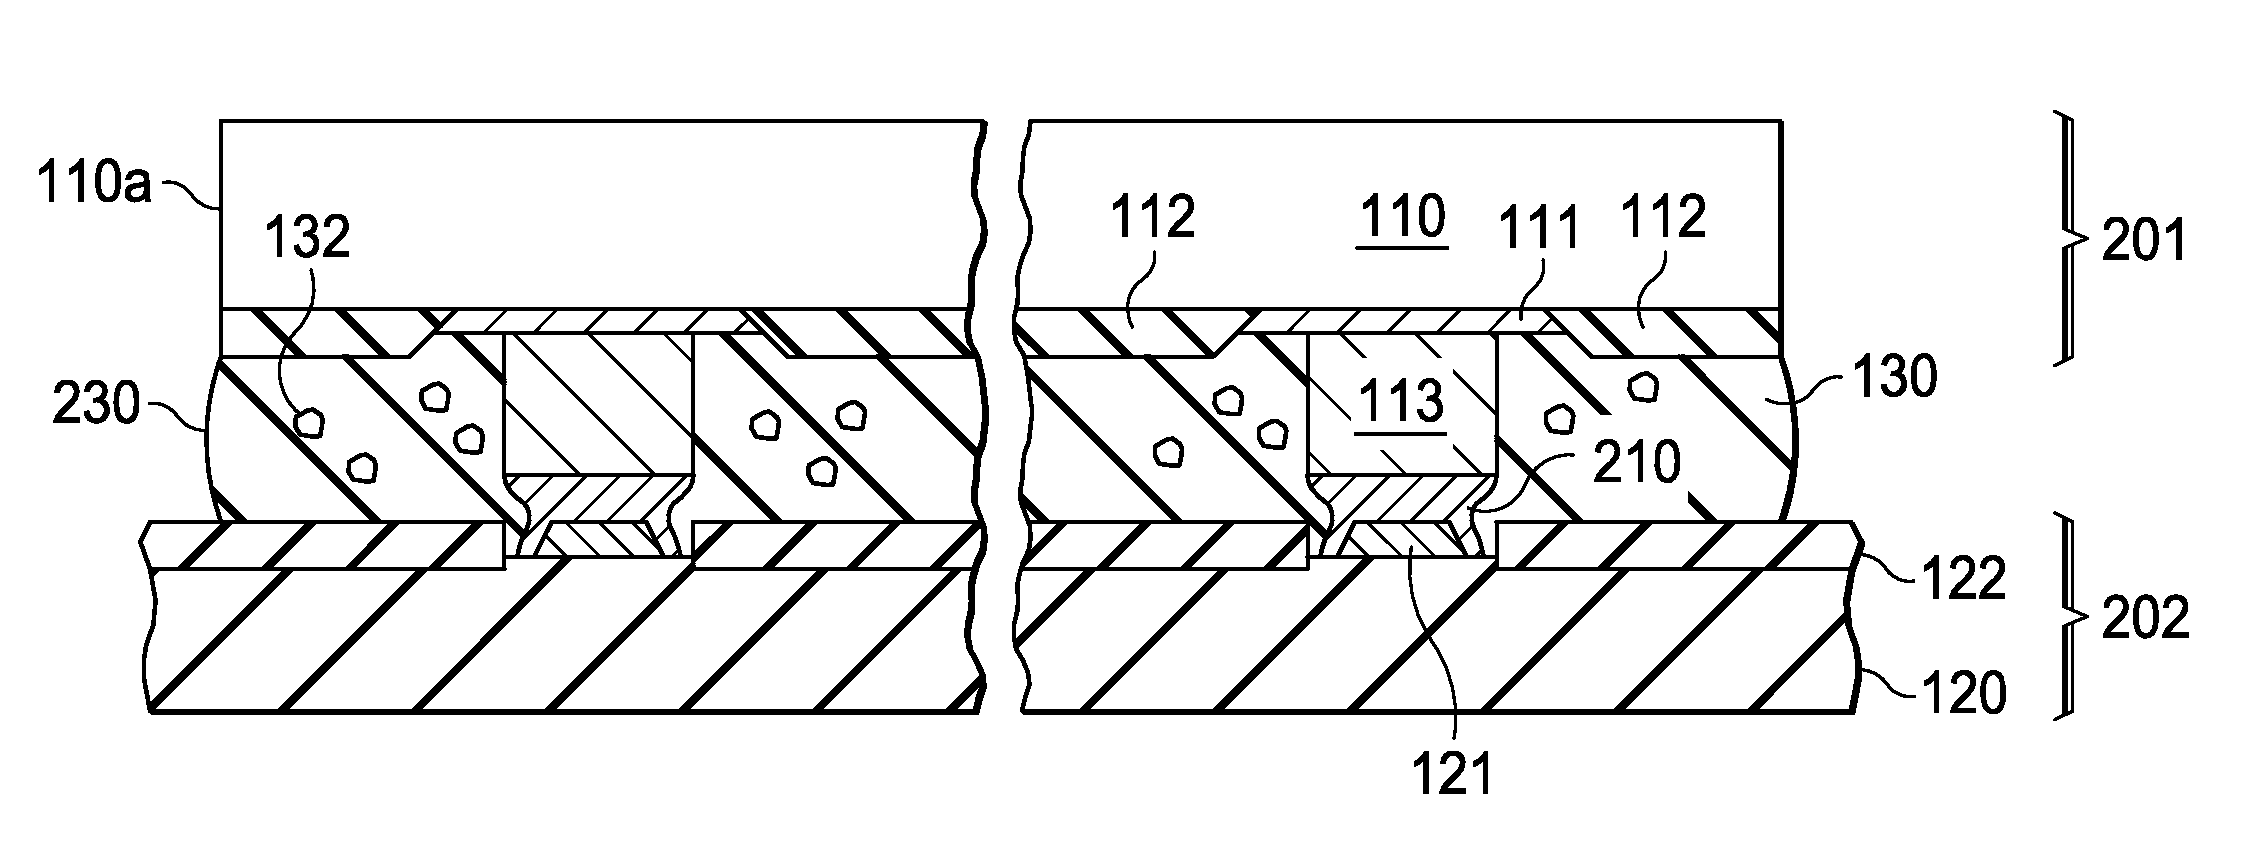 Method for fine-pitch, low stress flip-chip interconnect